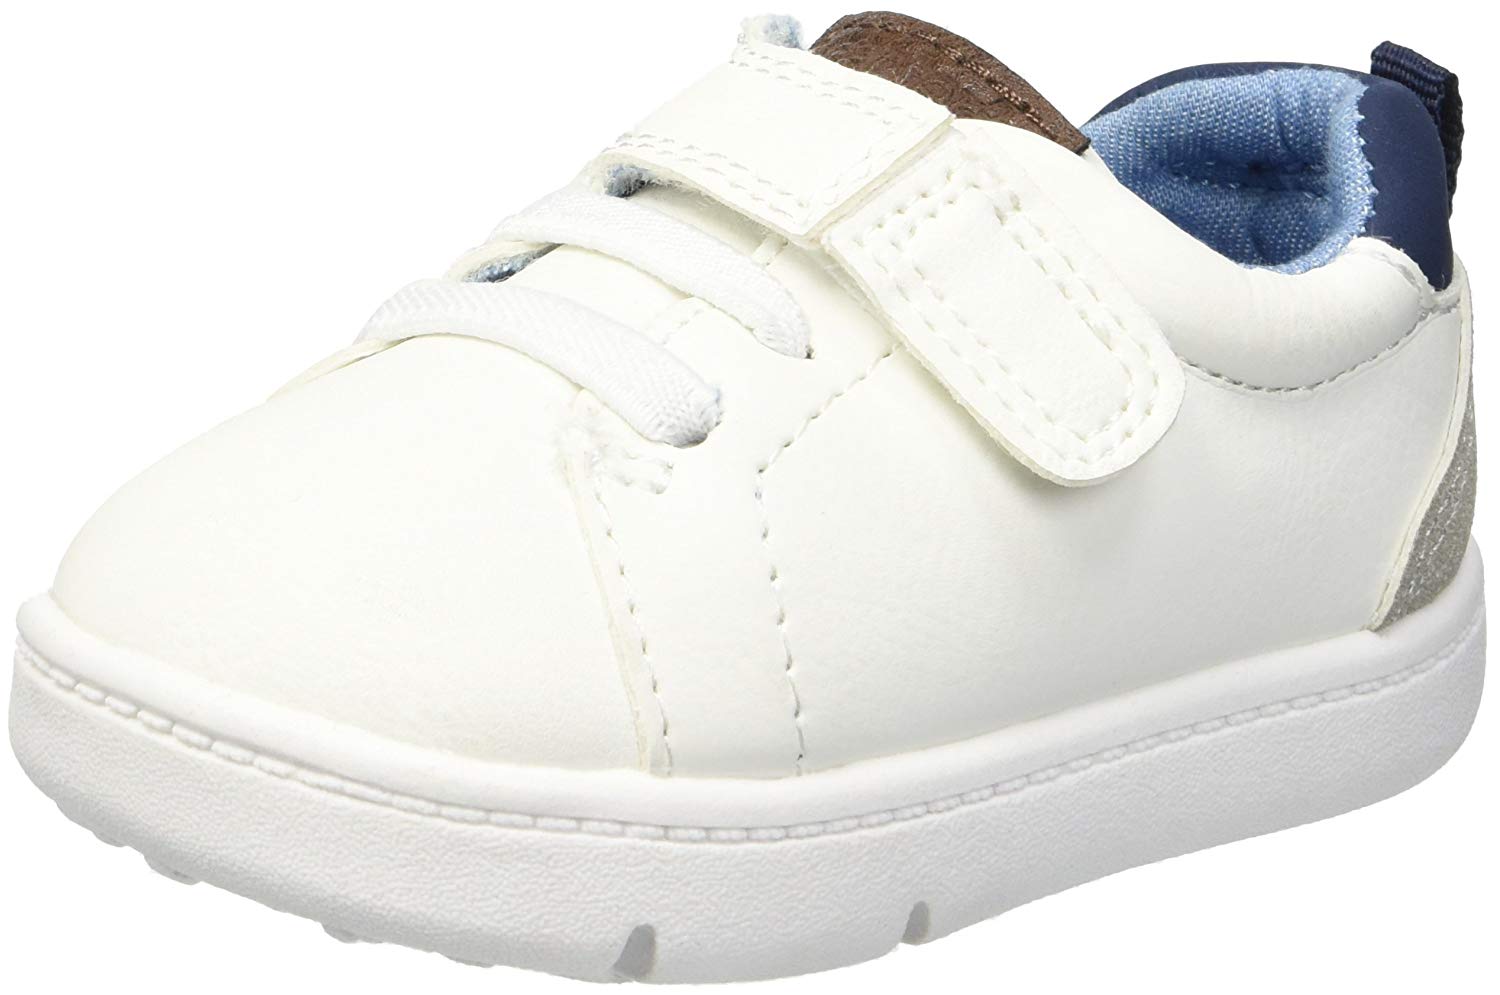 Best Shoes For Babies Learning To Walk: Baby Shoes Review in 2020